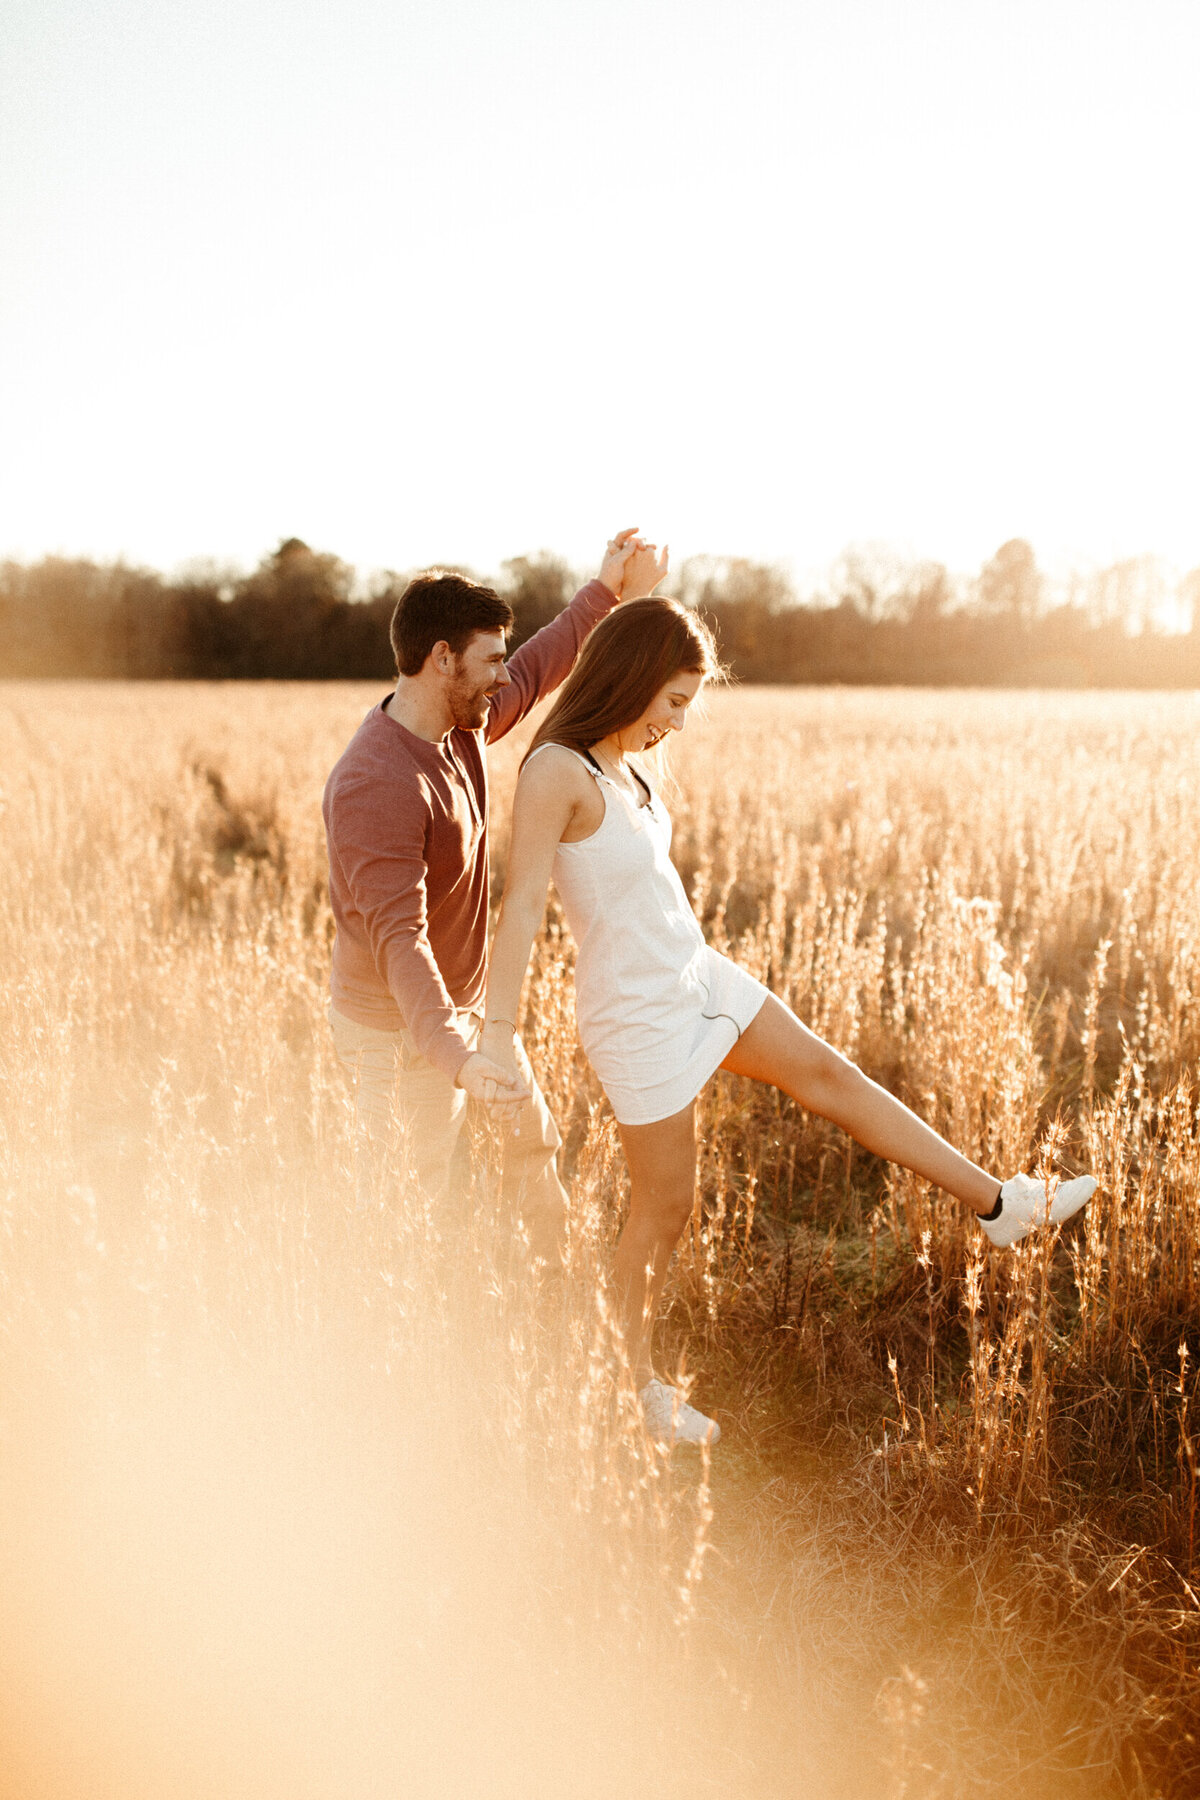 A couple is doing the airplane walk in a golden field with tall grass at sunset.